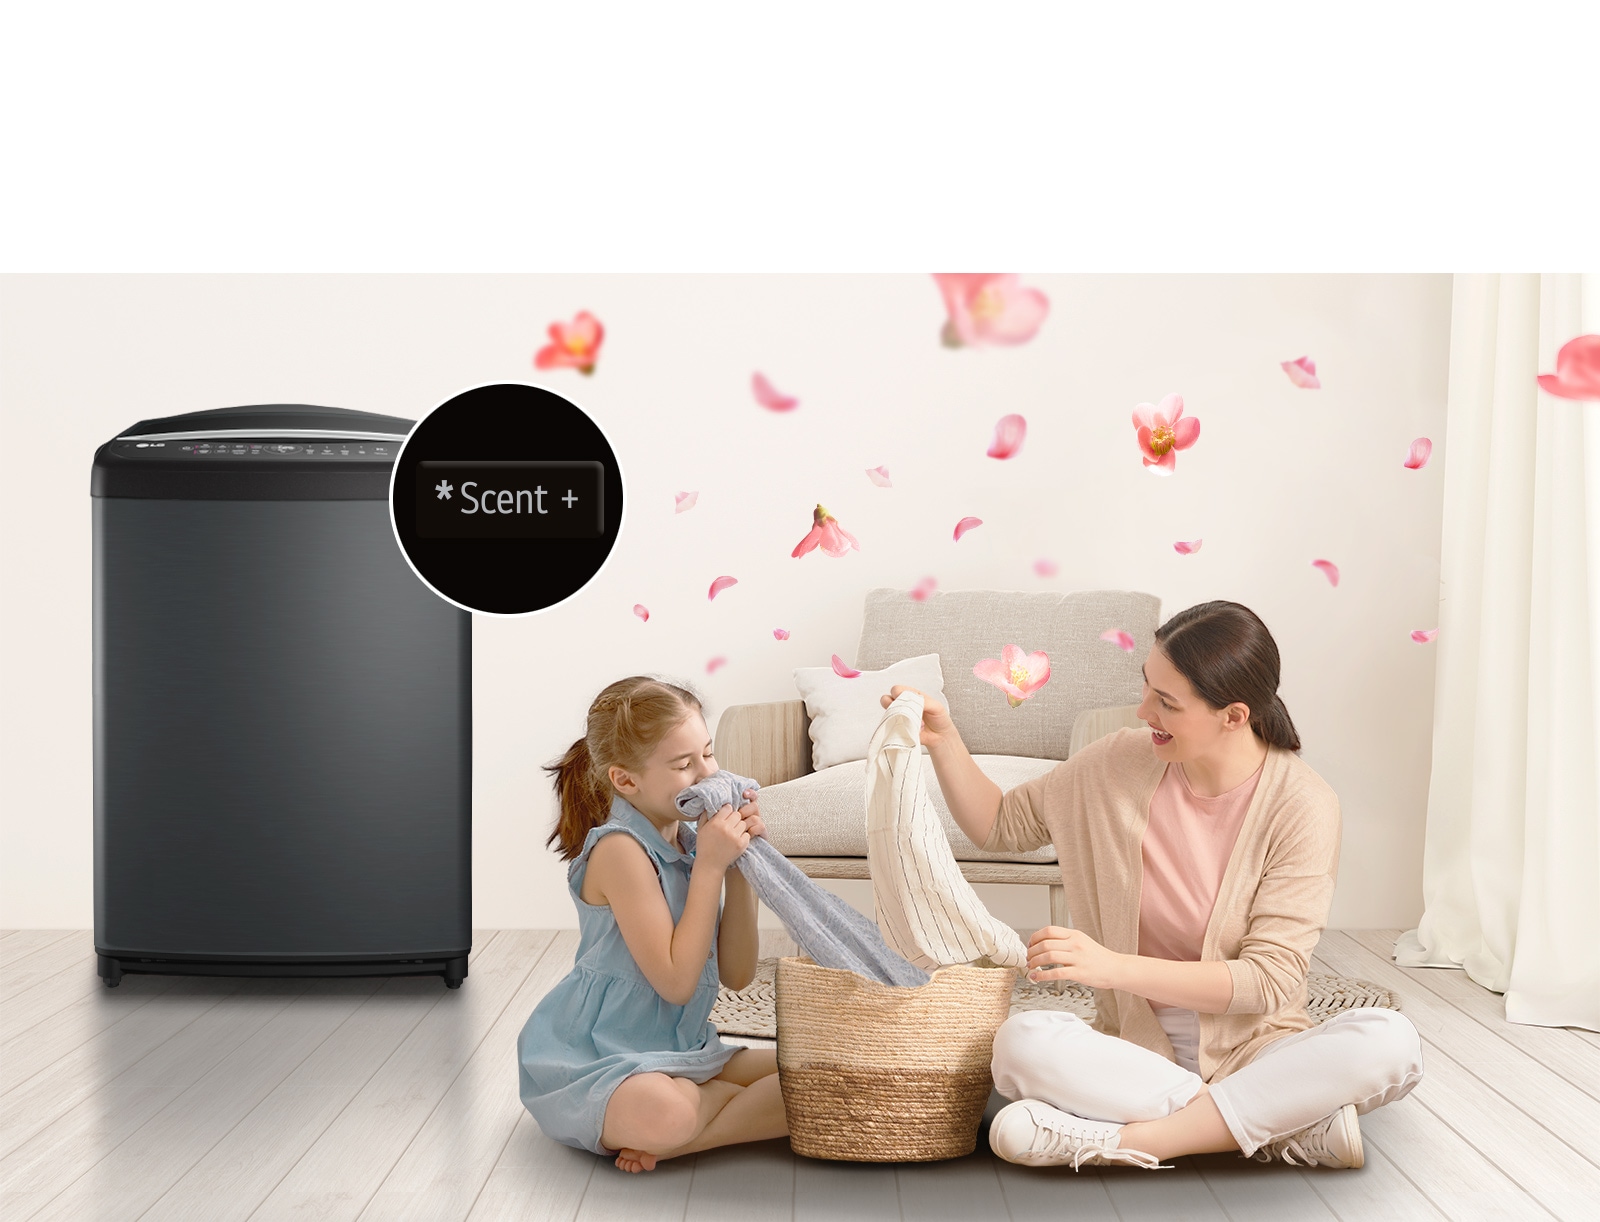 The 'scent' button on the LG washing machine is emphasized, a mother and daughter sit on the floor enjoying the smell of a towel that just came out of the washing machine that sits next to them. Petals are flying around them.